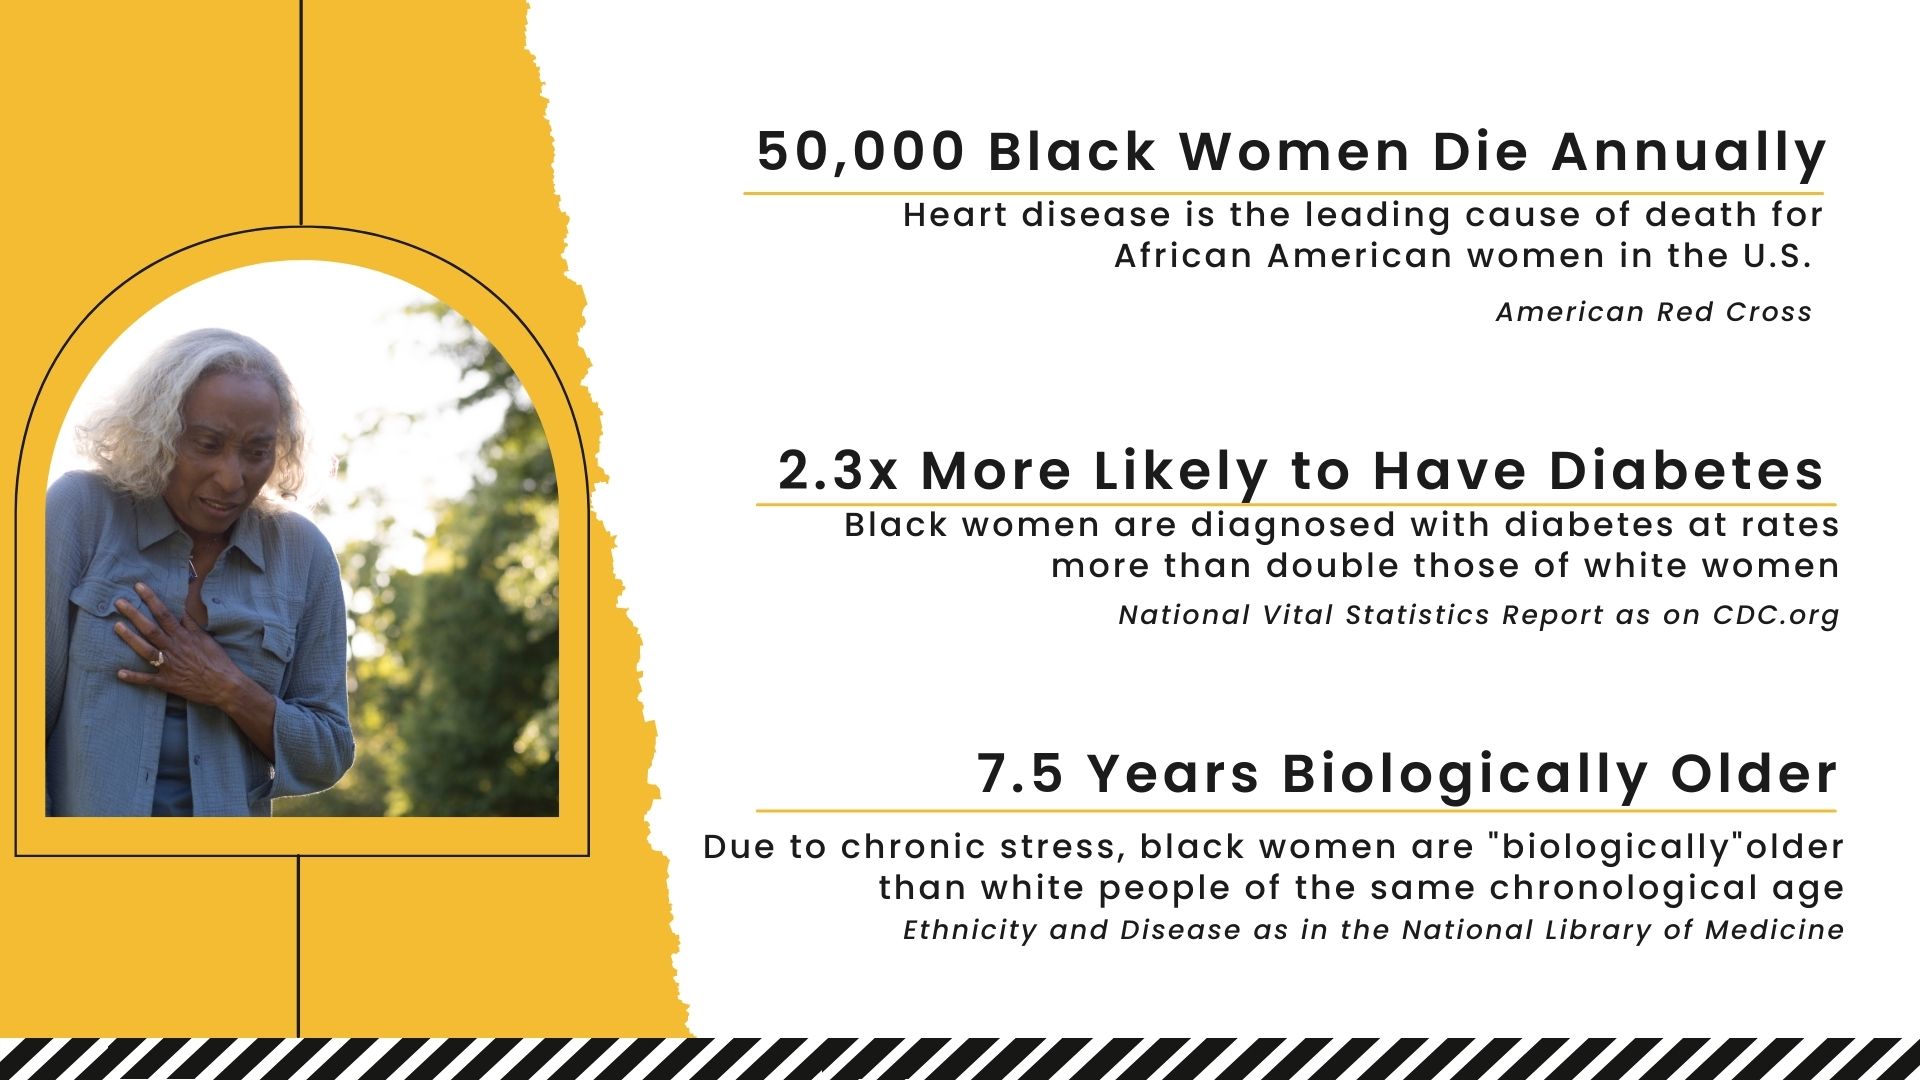 3 Chronic Health Issues Affecting Black Women in the U.S.